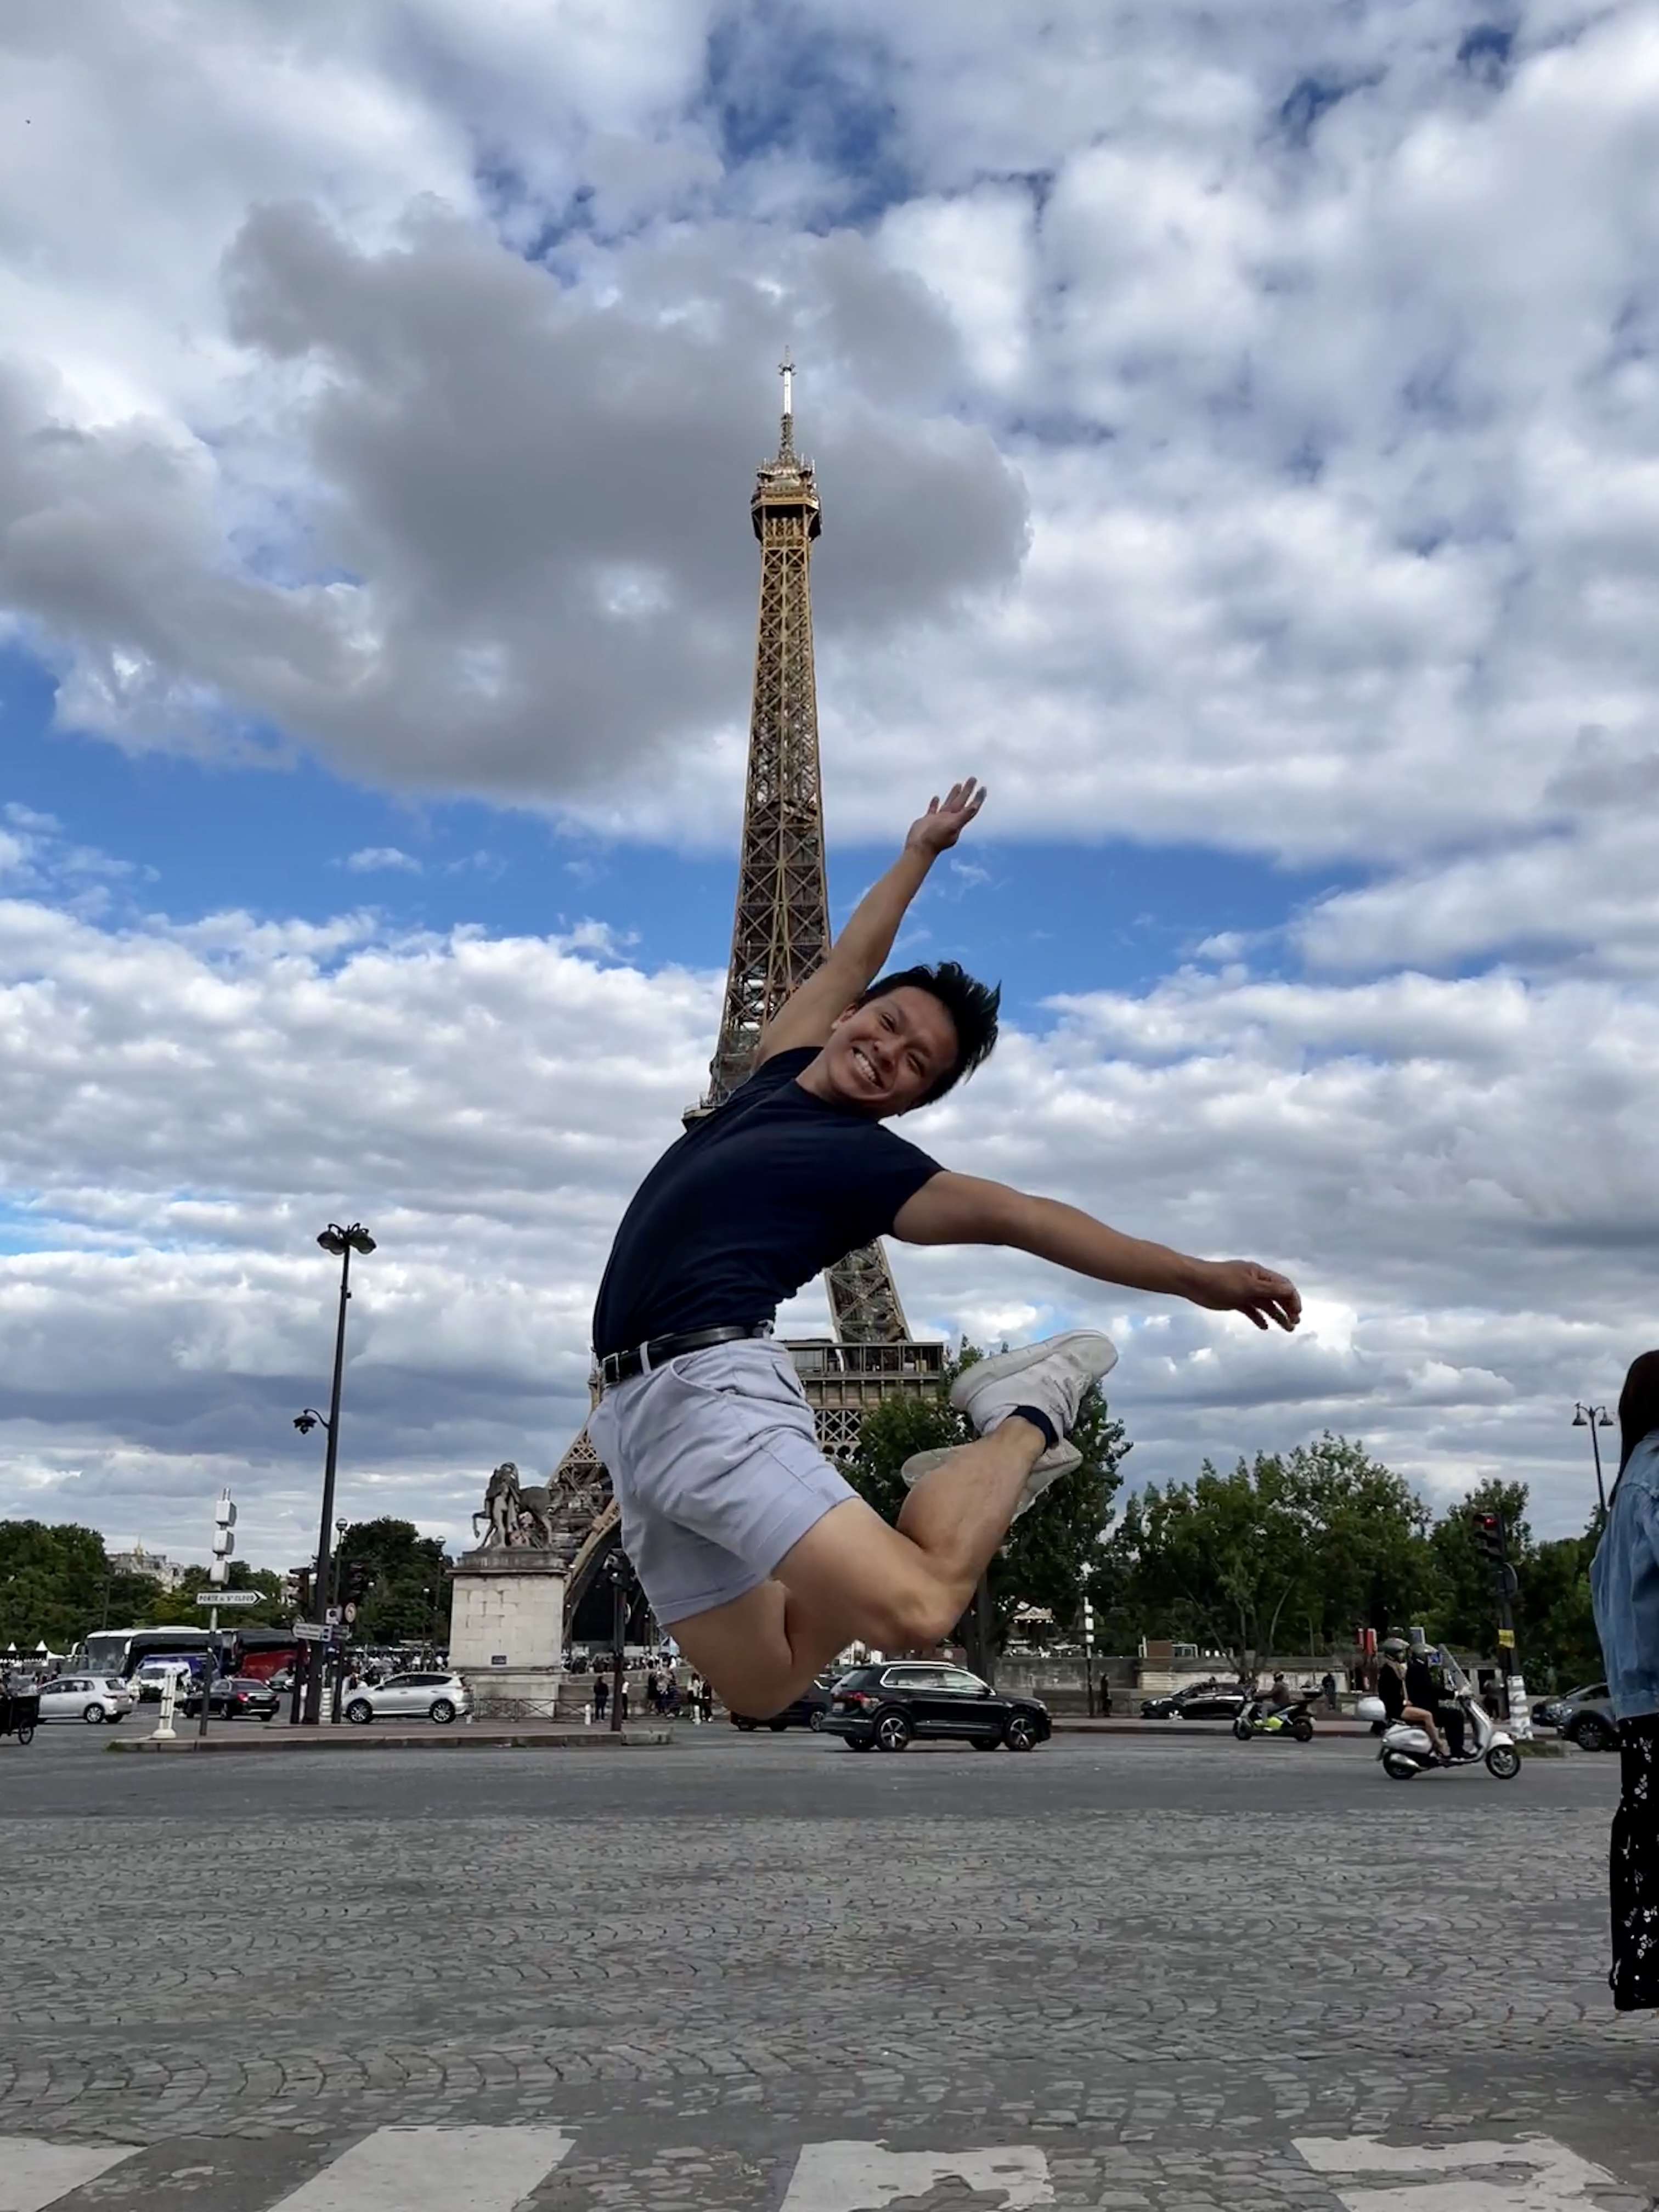 Johnny Dinh-Phan leaps into the air in front of the Eiffle Tower